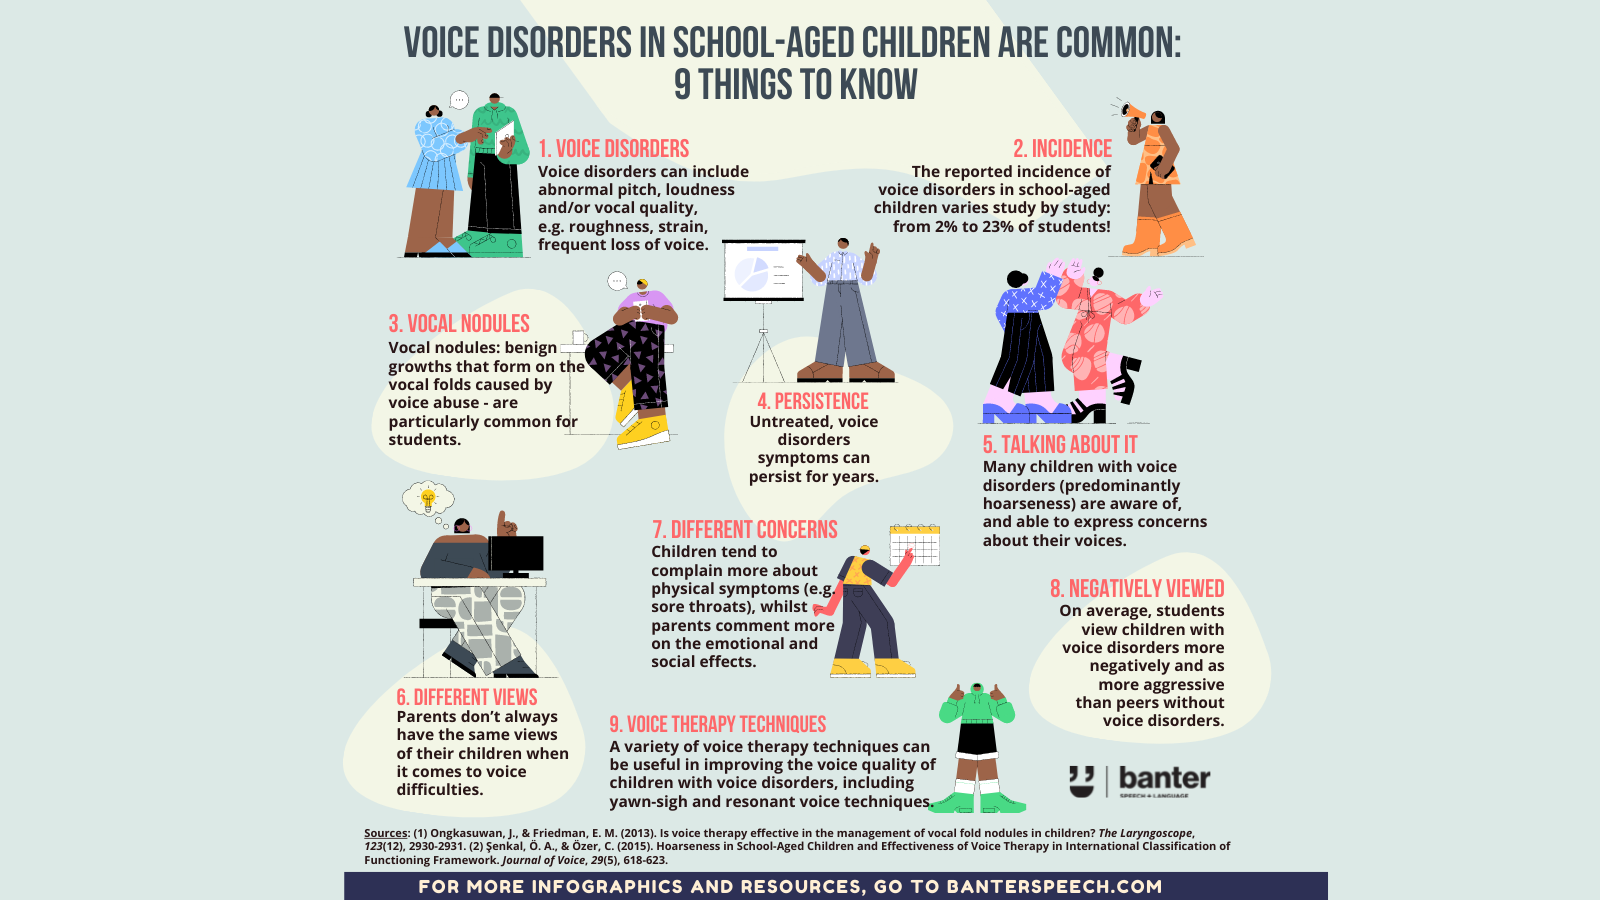 Voice disorders in school-aged children are common 9 things to know